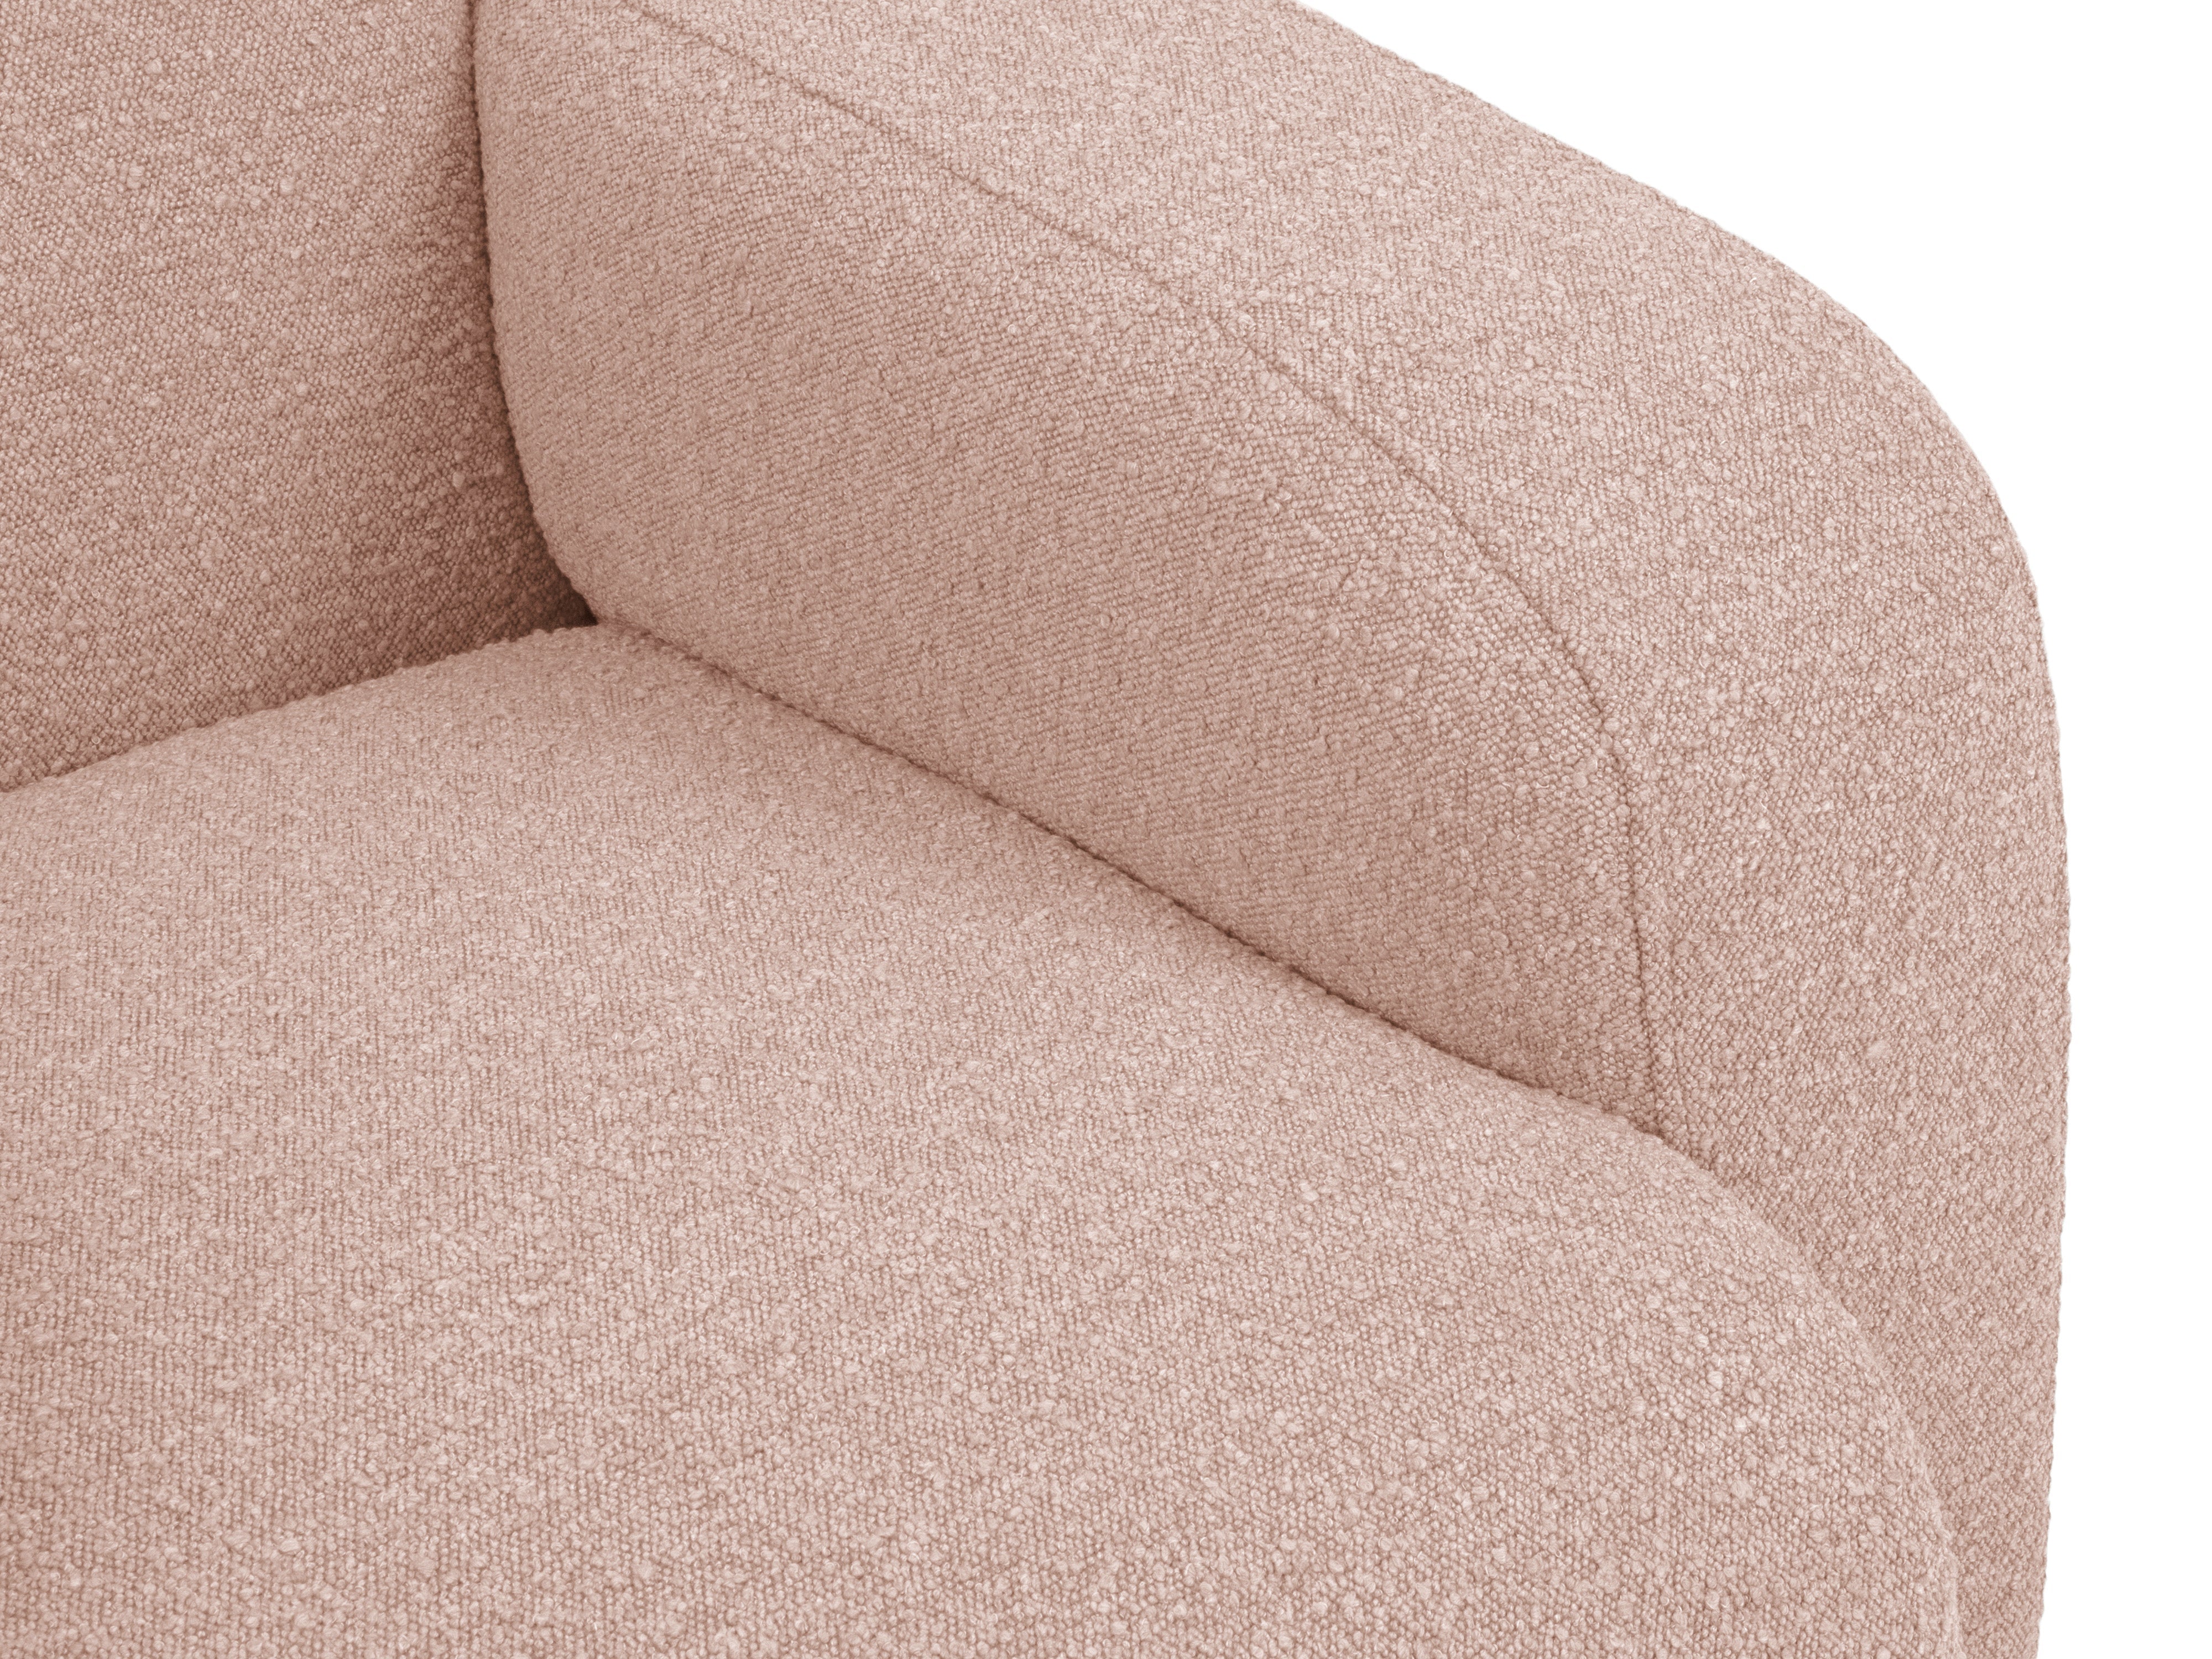 Armchair in boucle fabric MOLINO powder pink